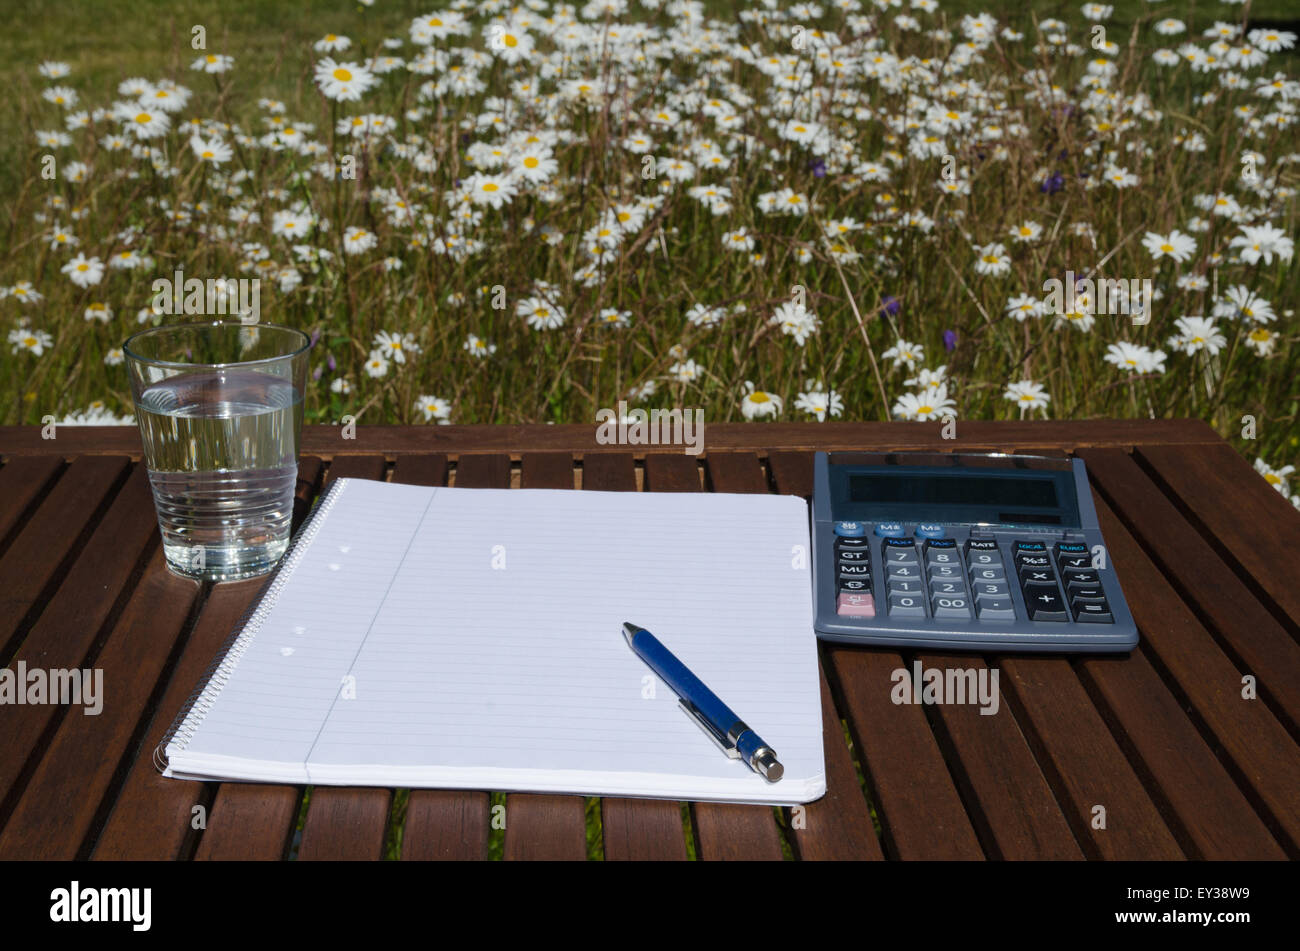 Outdoors work place with pen, paper, glass of water and calculator at a table in a garden with flowers Stock Photo